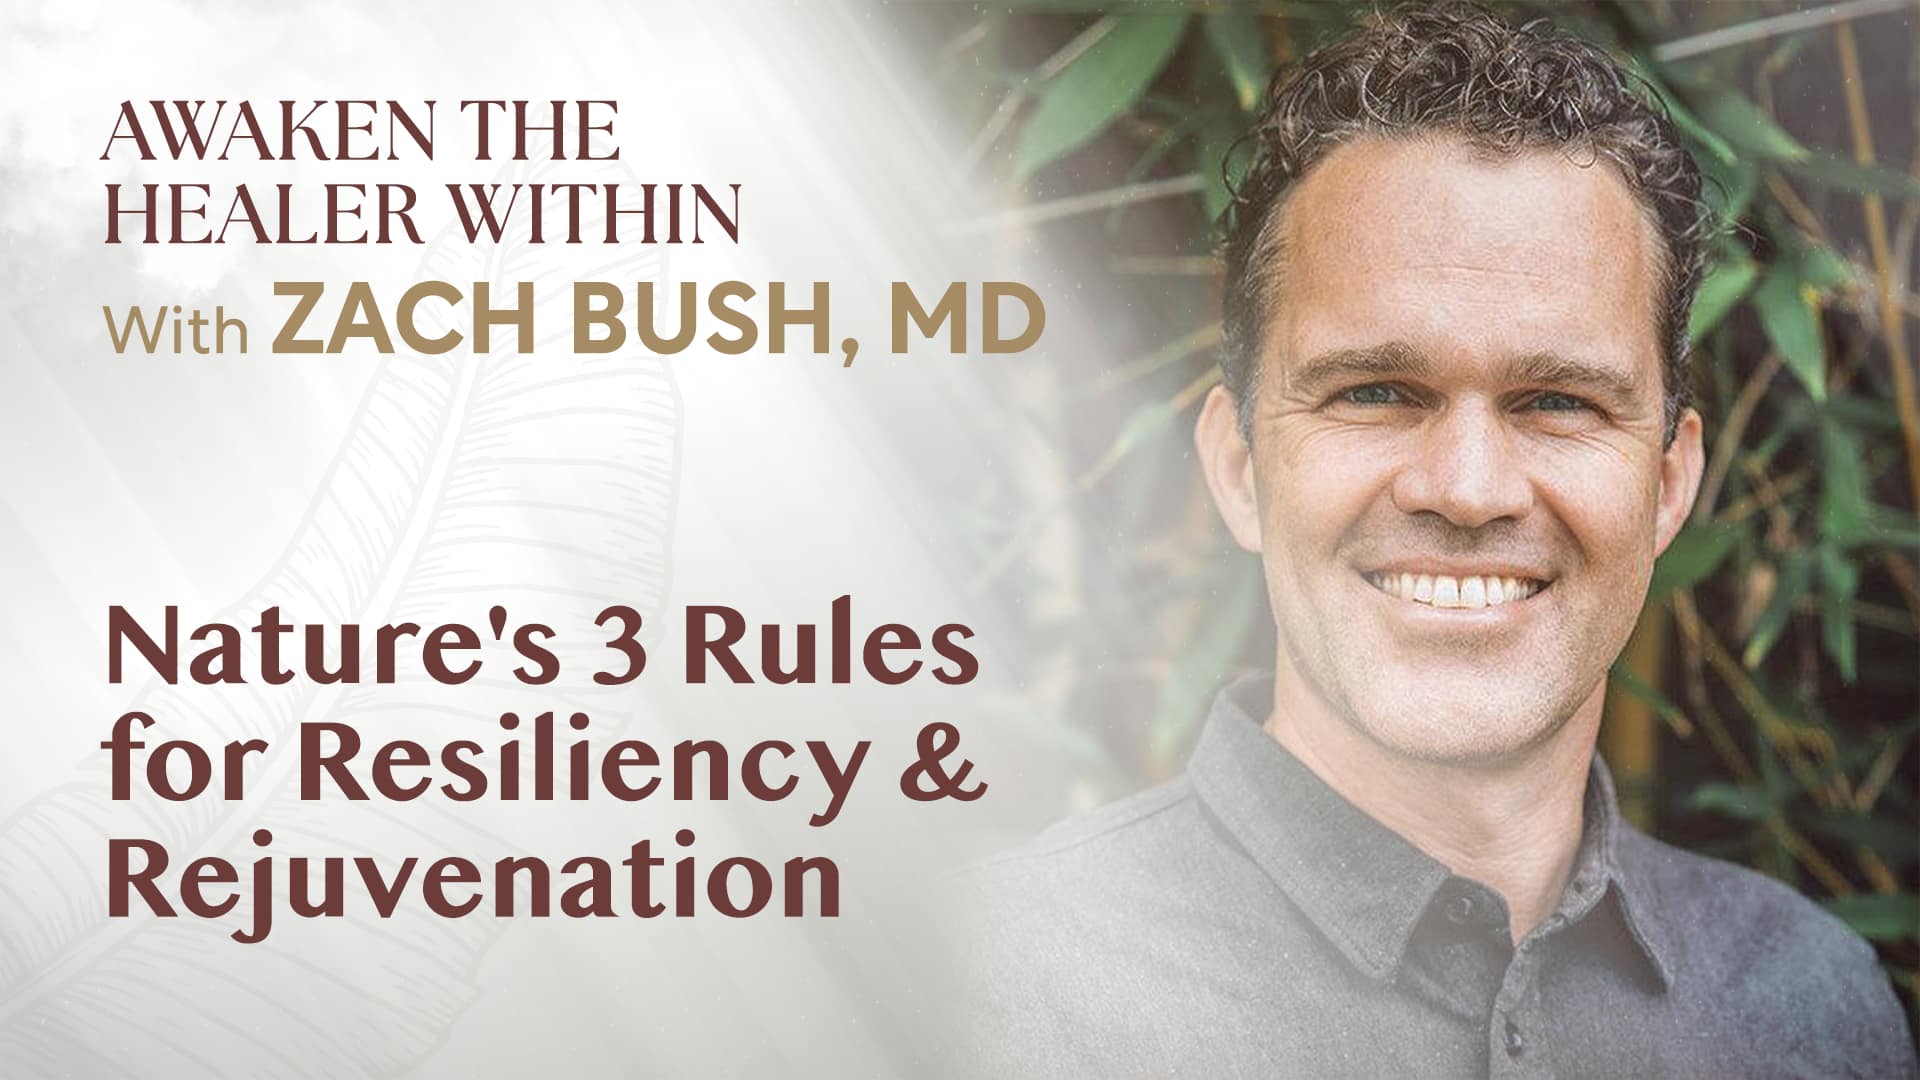 Nature's 3 Rules for Resiliency & Rejuvenation